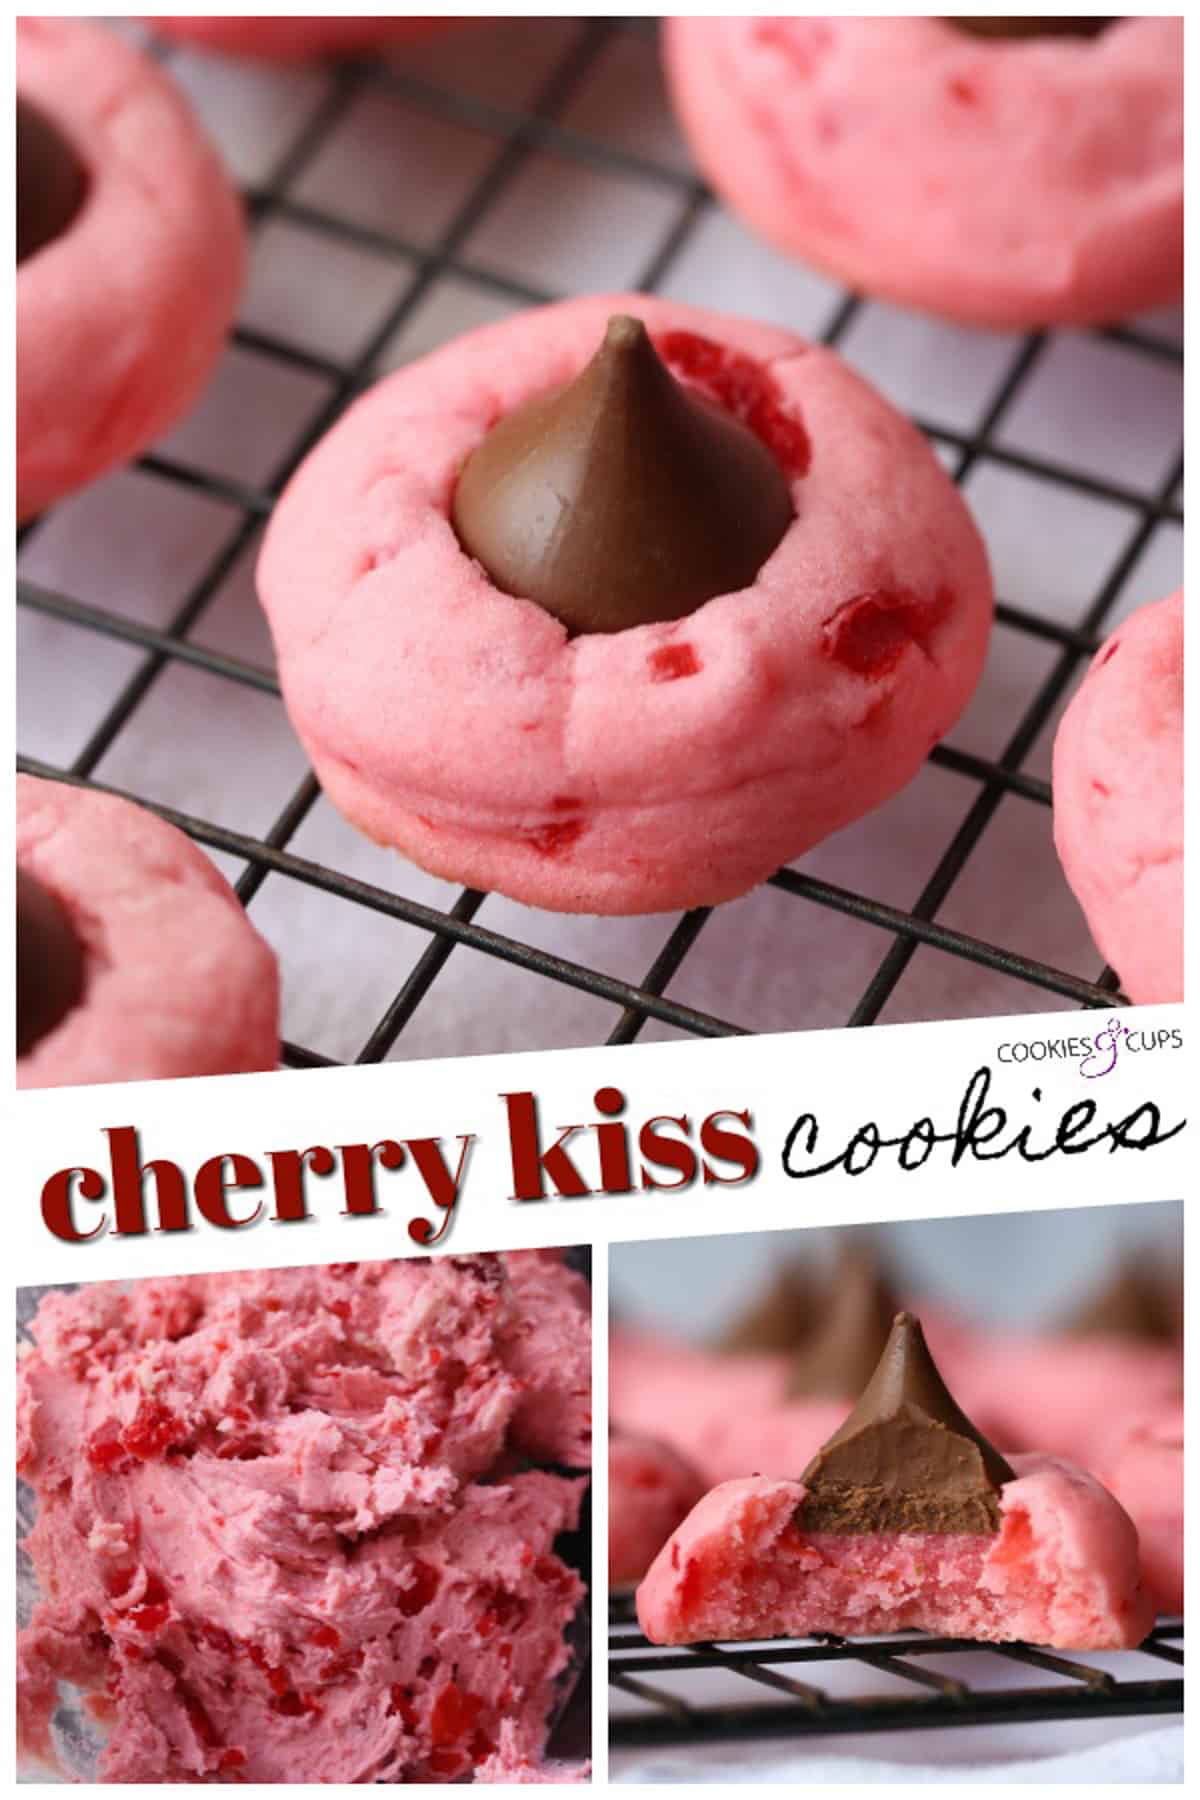 Cherry Kiss Cookies Pinterest Image collage with text